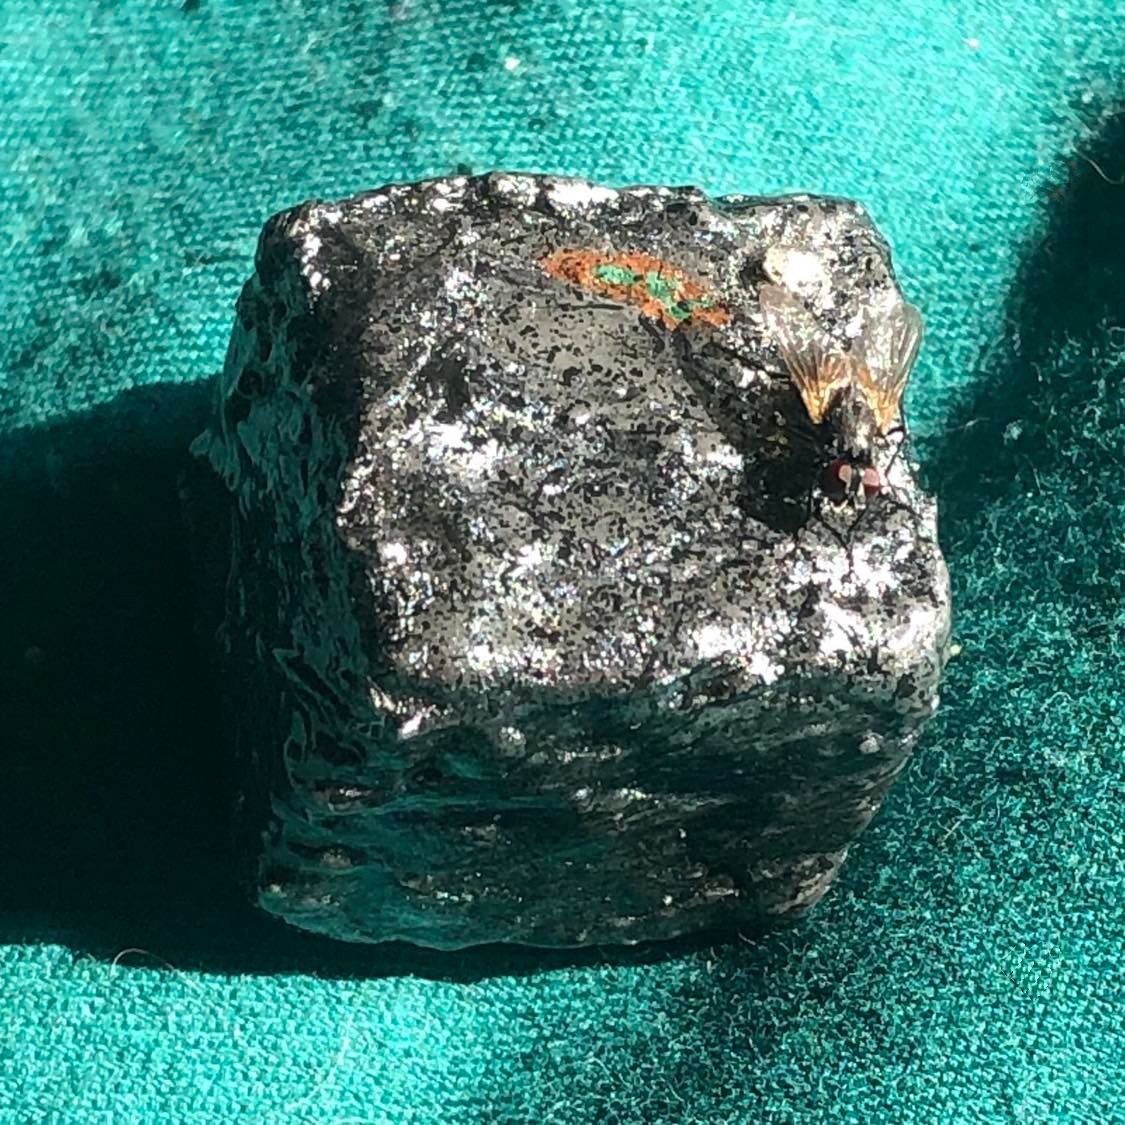 The cube of Kolyoral, a rough silver-grey cube with many small black speckles, and showing the garden and the iron fortress of Zandikar. A housefly is perched on top of the cube, guarding the fortress.